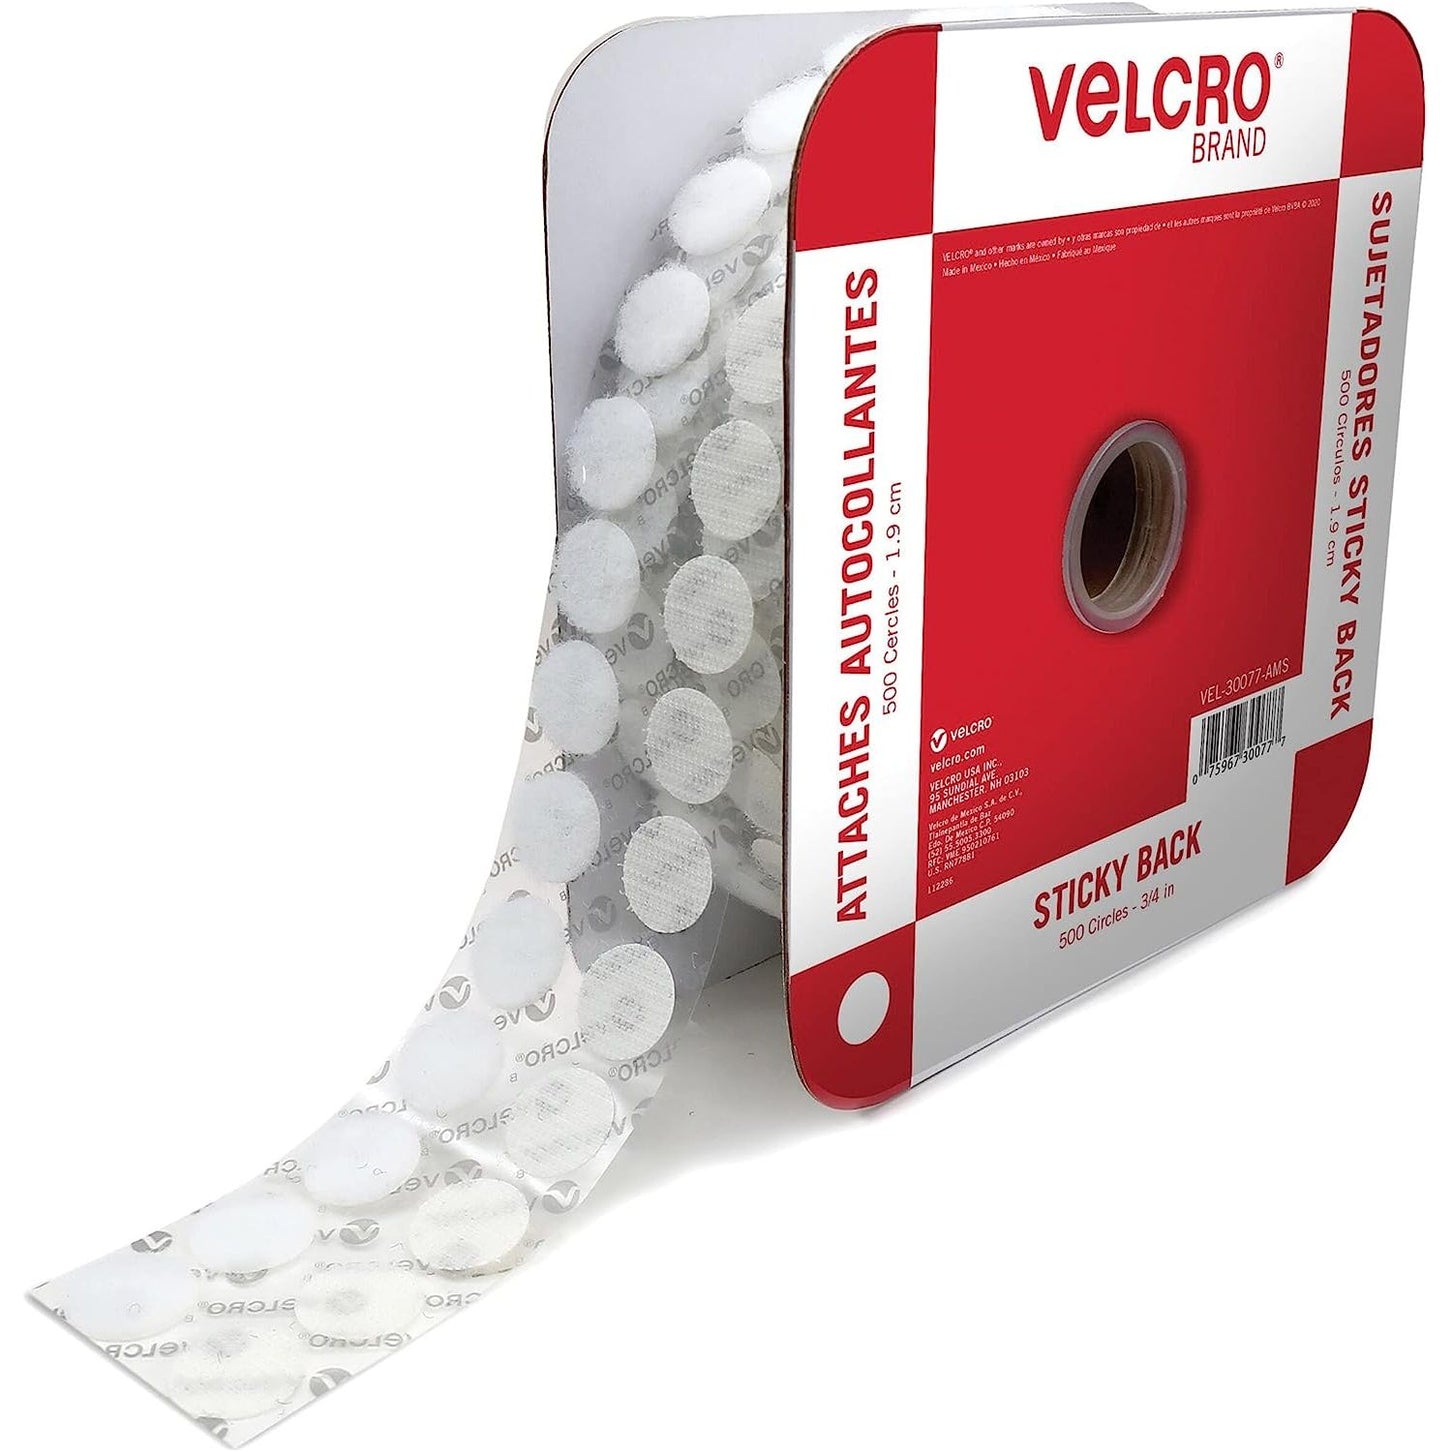 VELCRO Brand Adhesive Dots White 500 Pk 3/4" Circles Sticky Back Round Hook and Loop